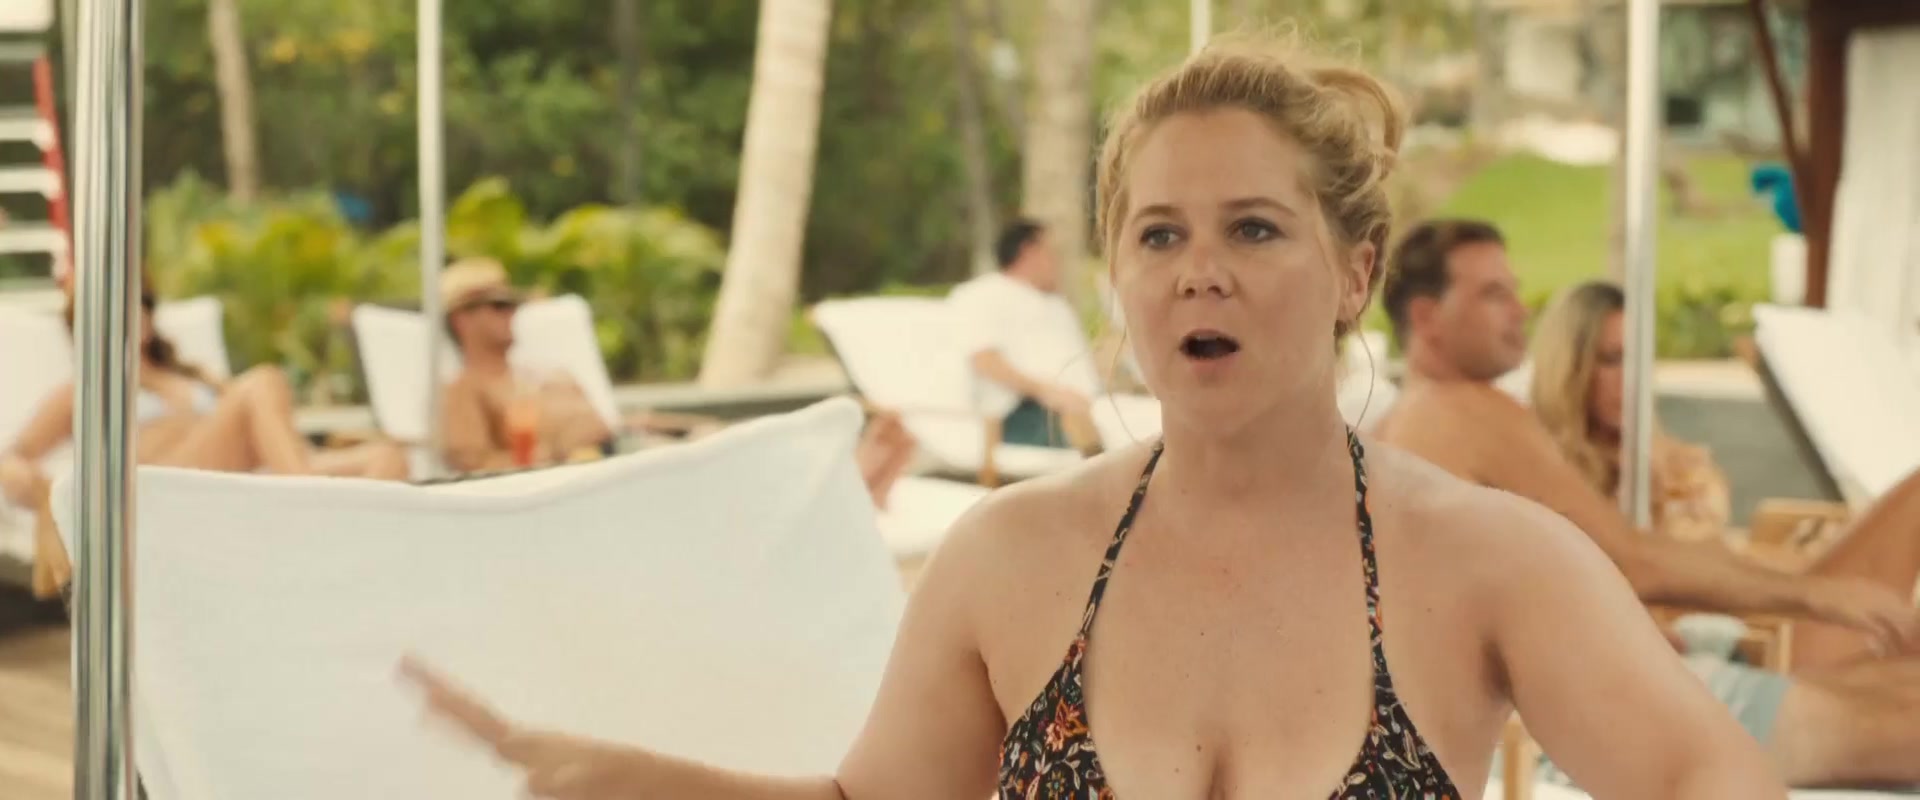 Schumer snatched topless amy Amy Schumer